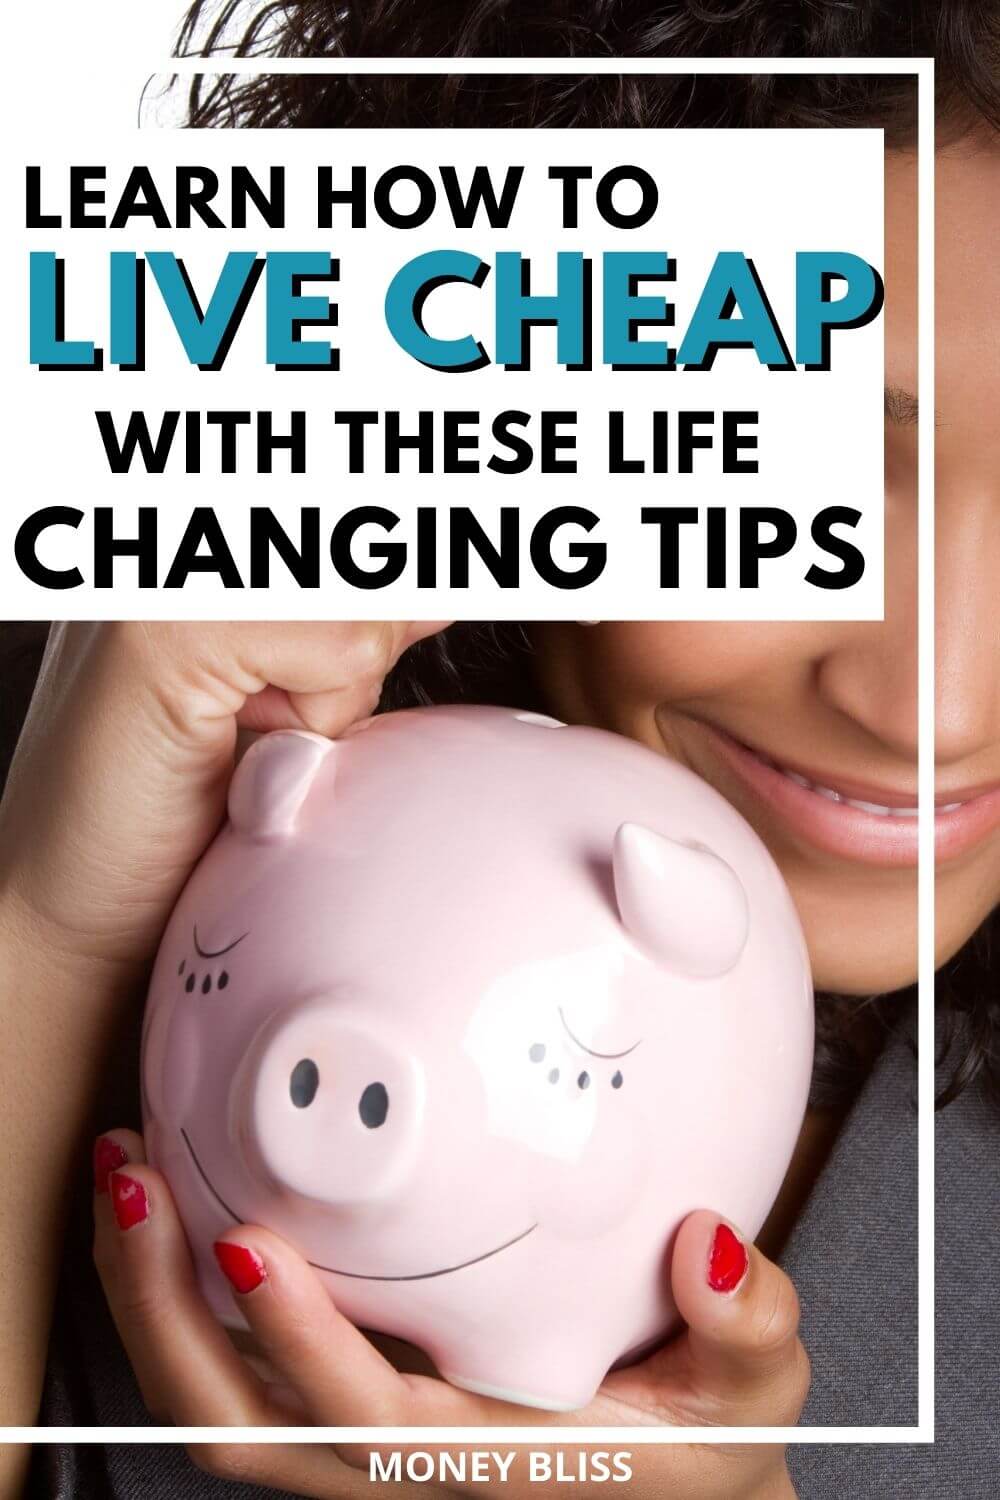 Learn how to live a cheap life by following these 3 simple tips and 70+ ways to live cheaper. You’ll have more money for what you really want to spend your money on, and the rest will go towards a better quality of life.